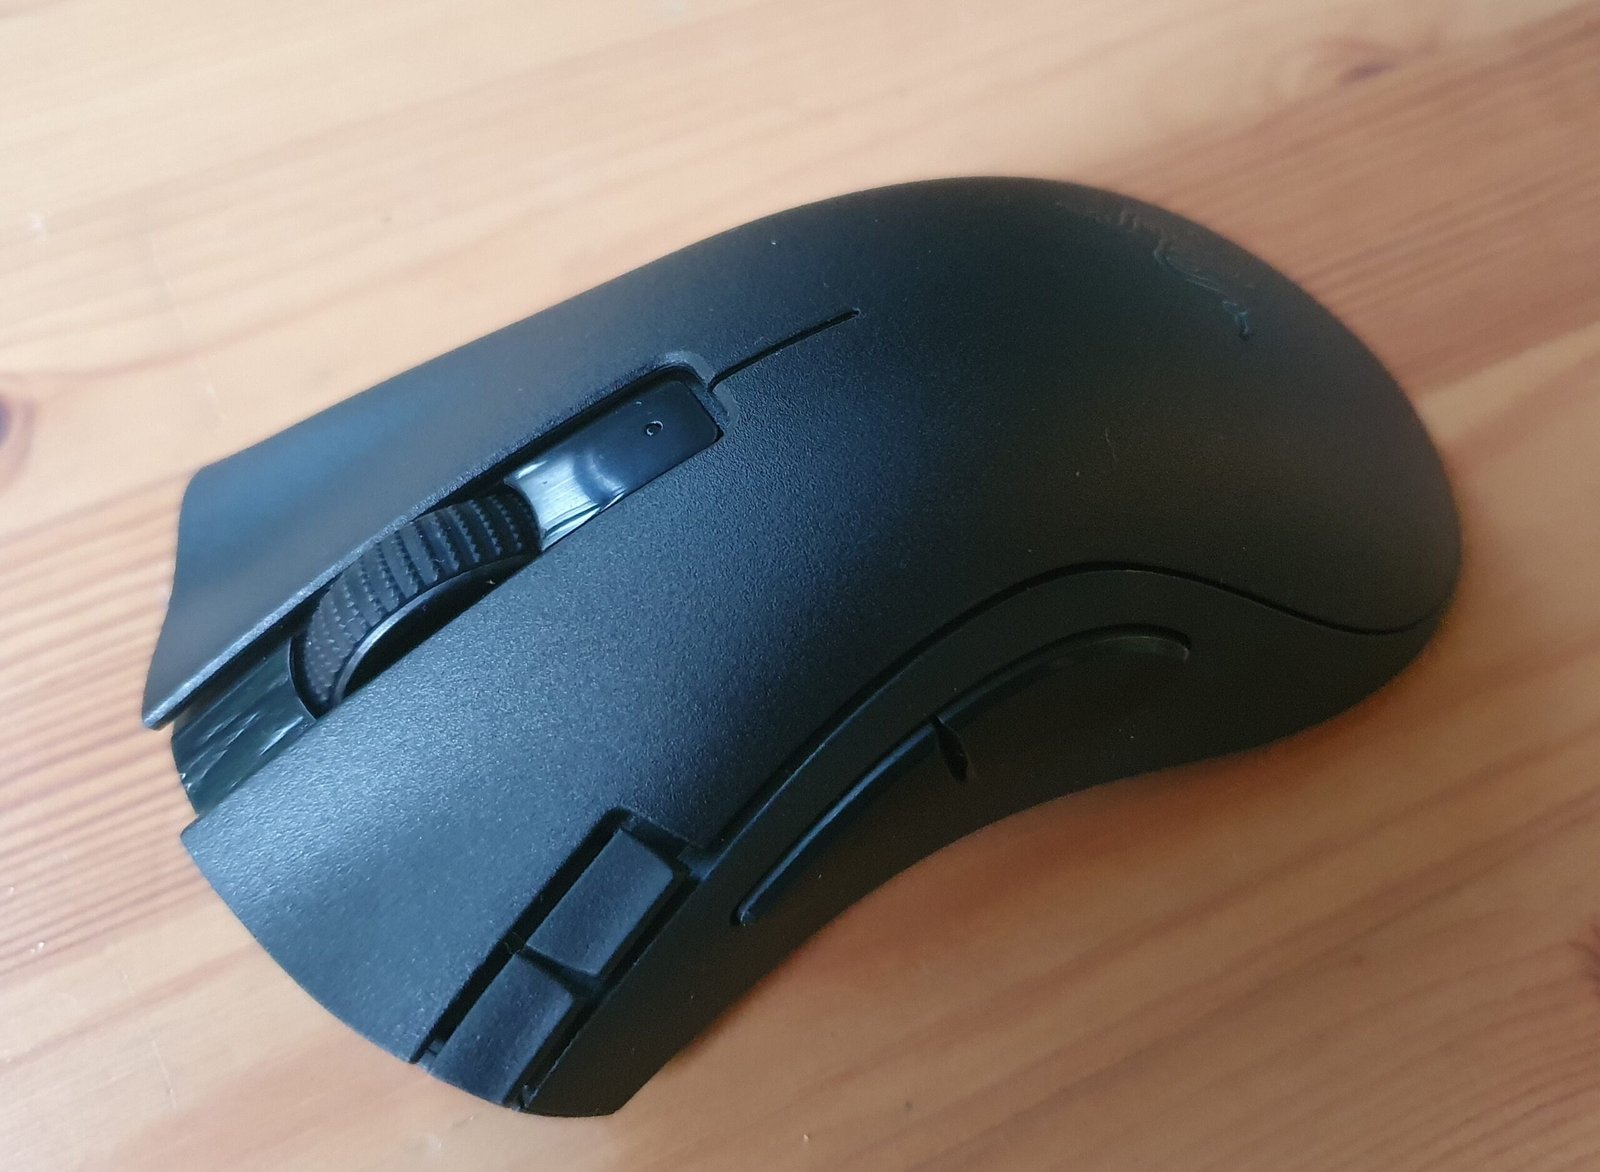 Razer DeathAdder V2 X Hyperspeed overview: A refined earn on the gaming mouse